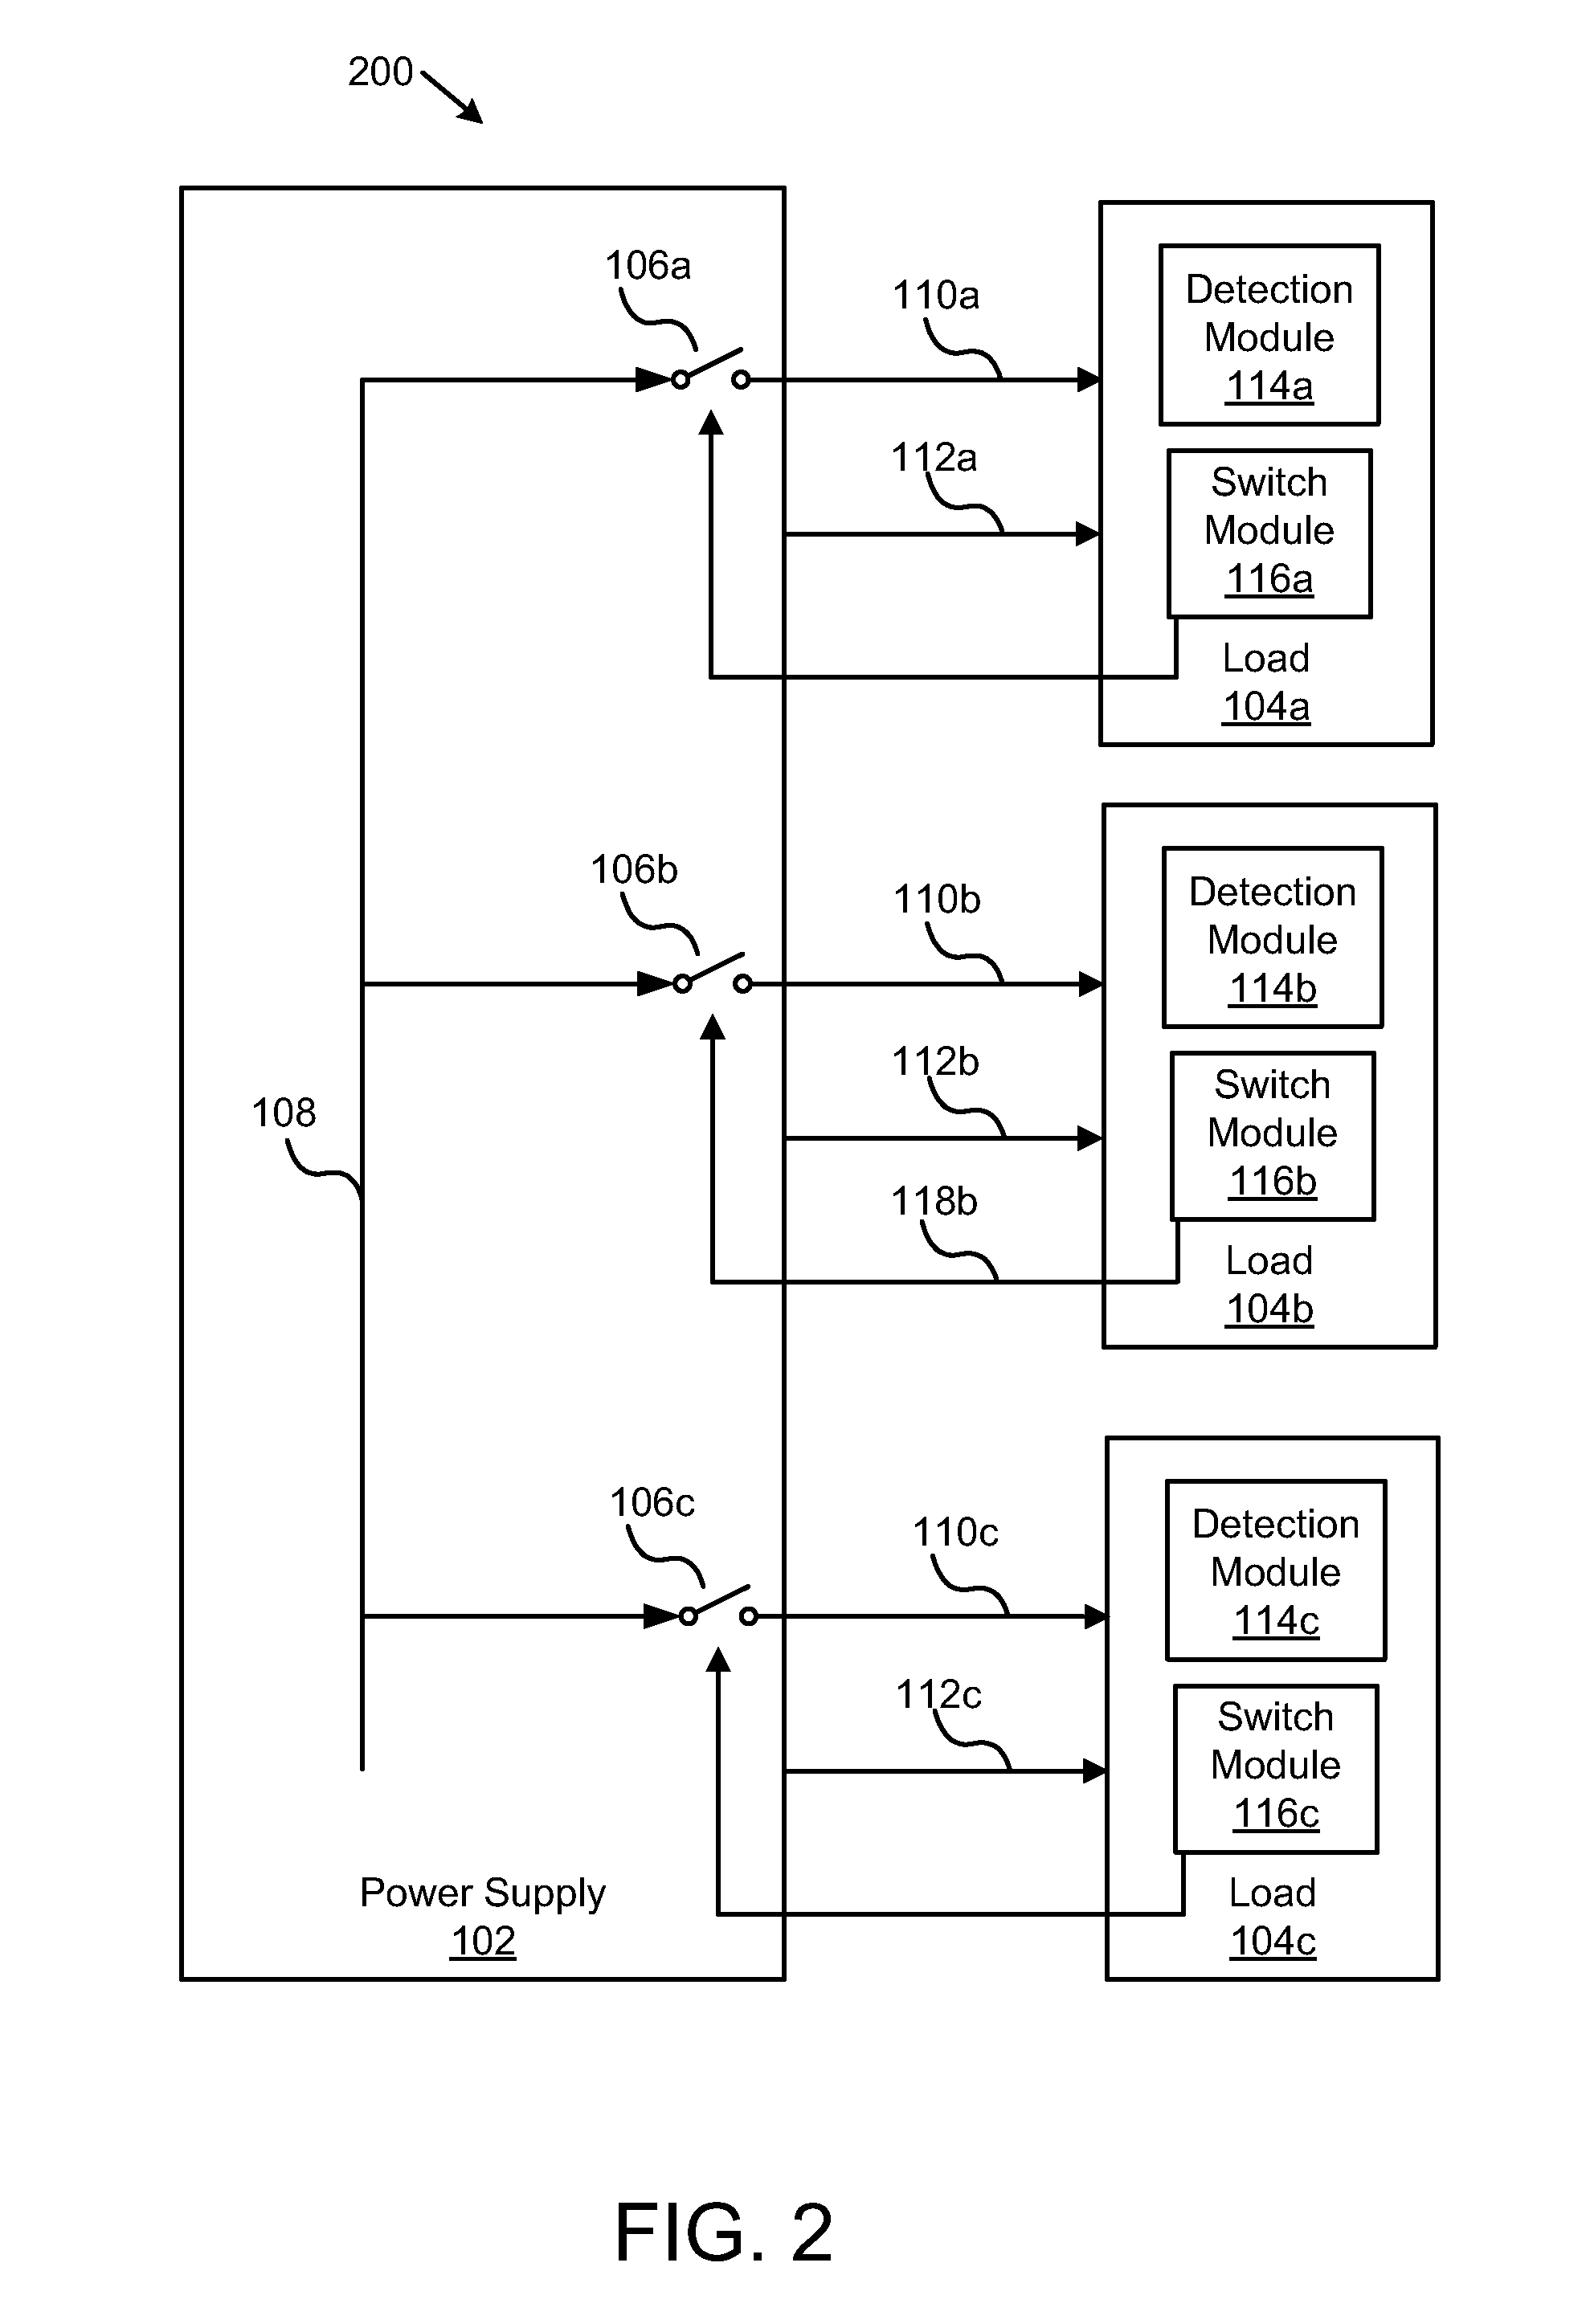 Apparatus, system, and method for safely connecting a device to a power source